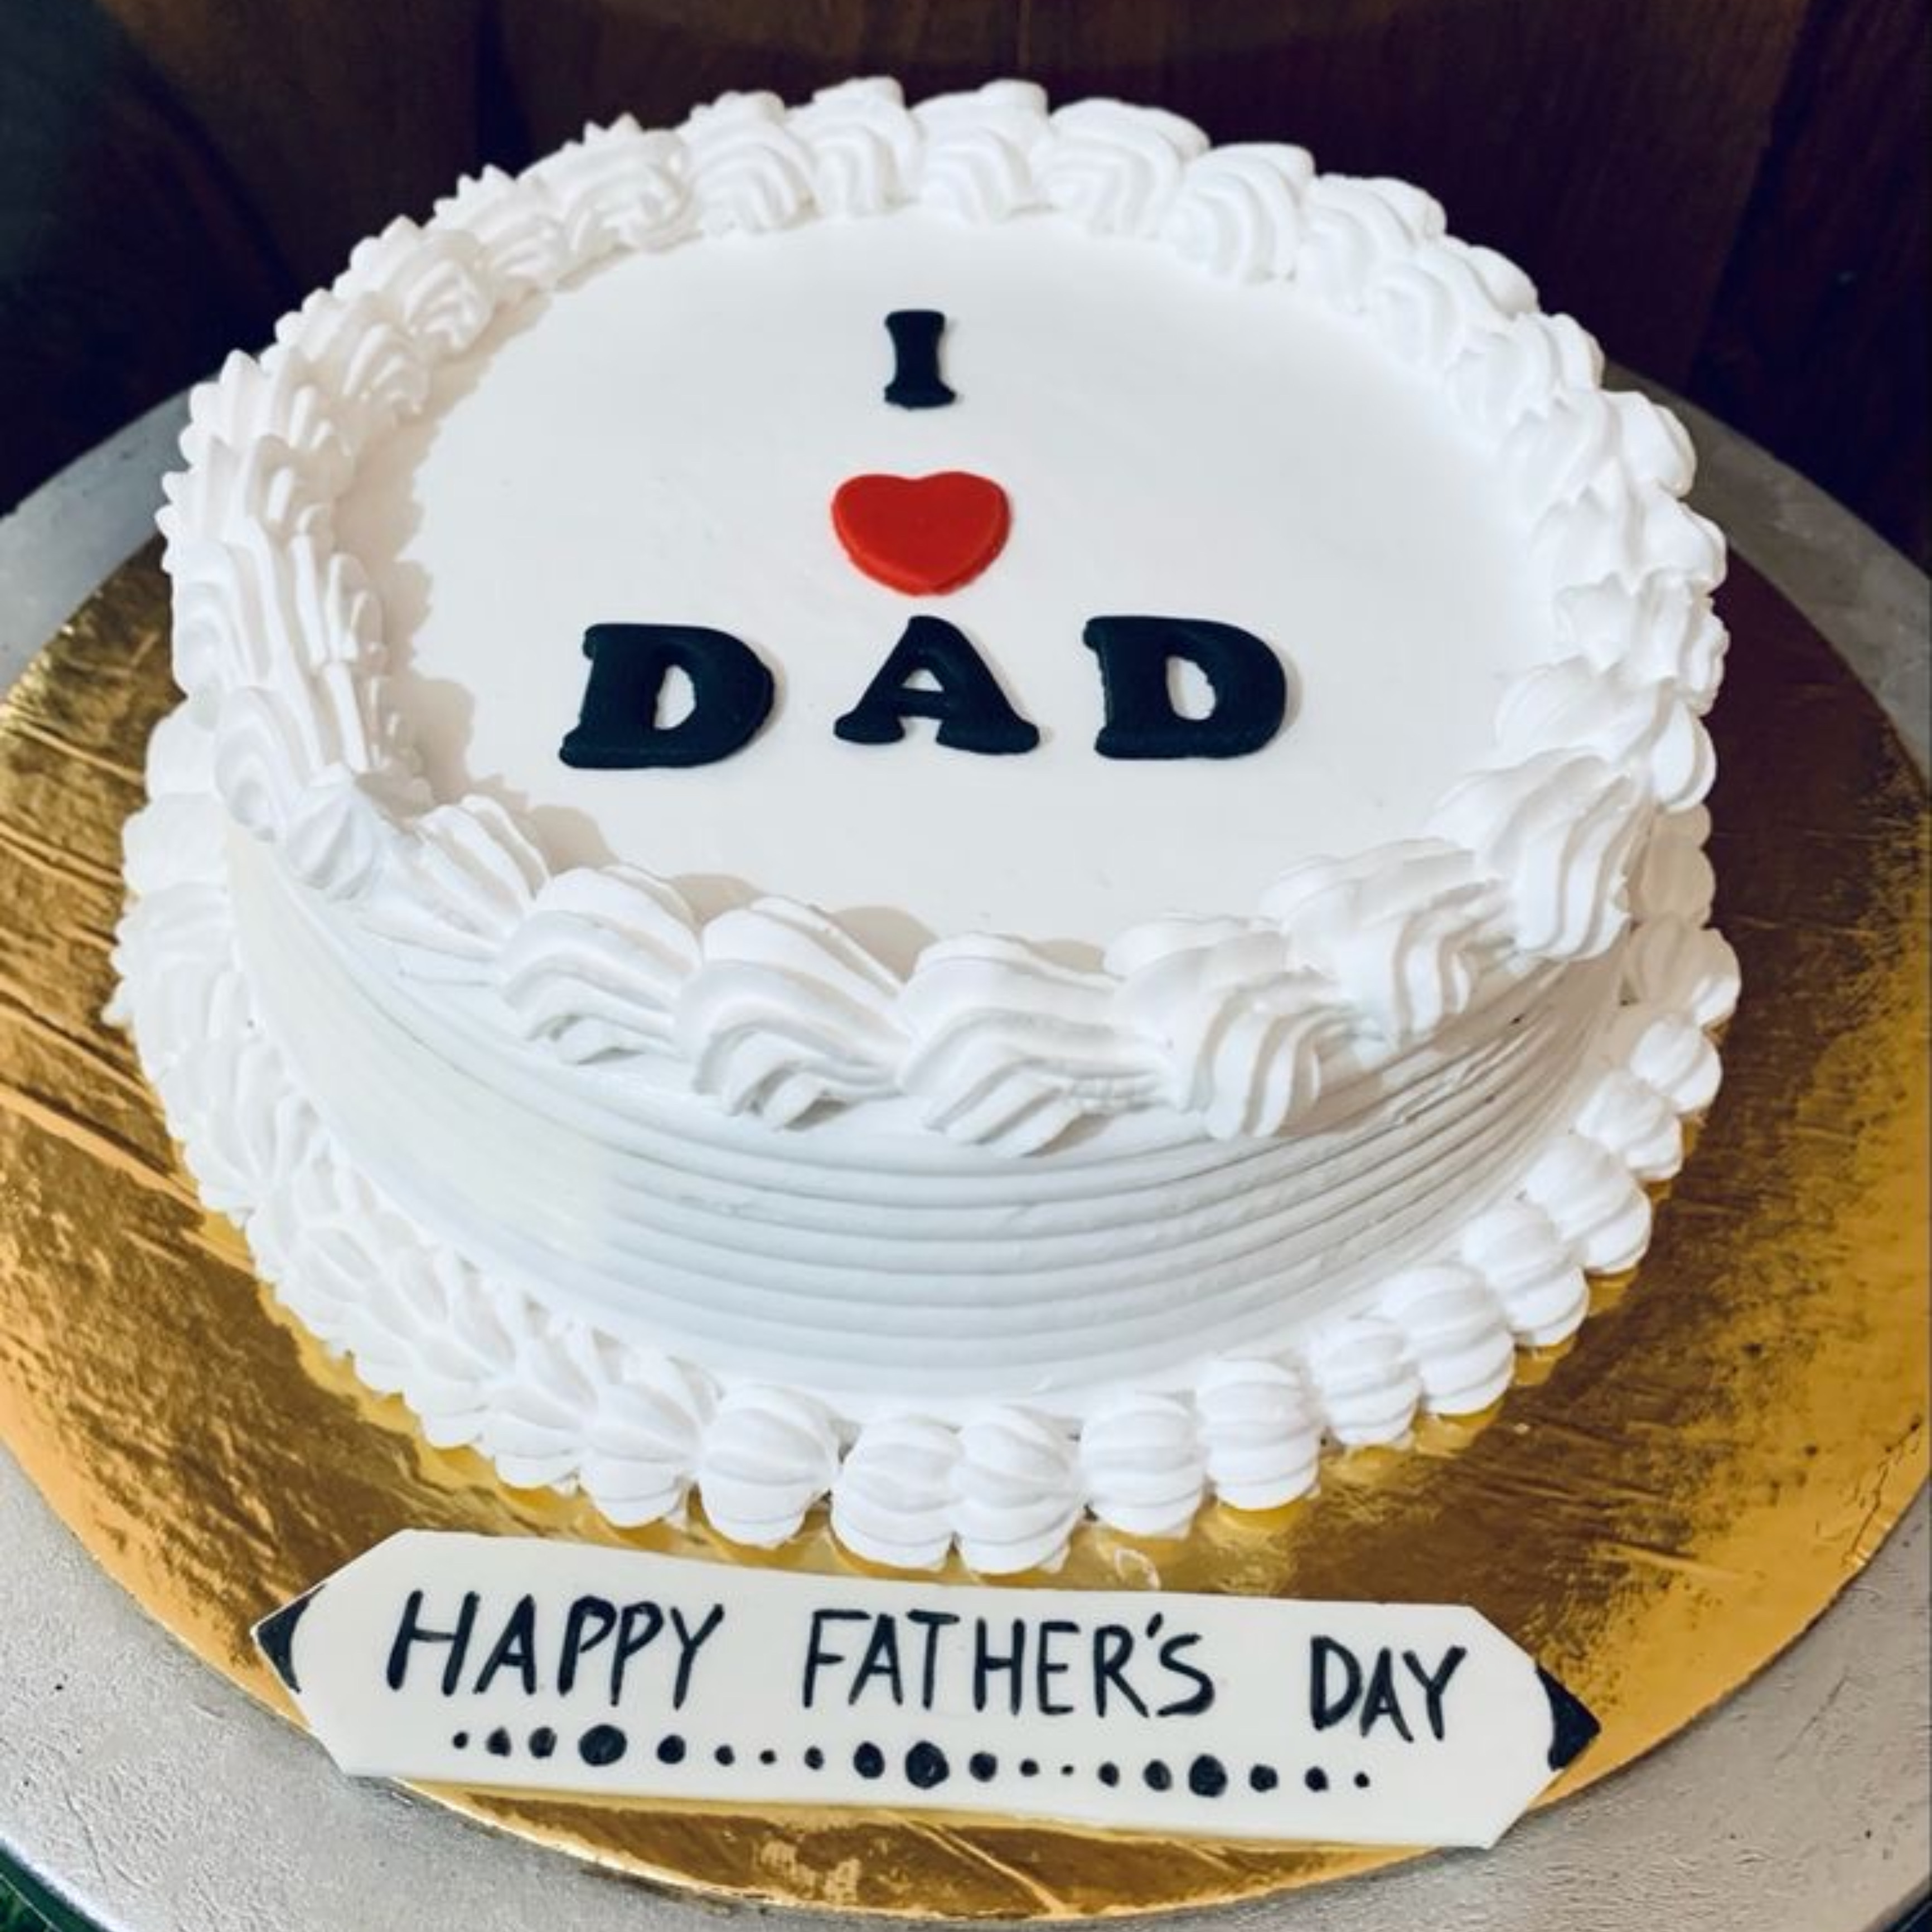 Send Fathers Day Square Pineapple Cake Online in India at Indiagift.in-sgquangbinhtourist.com.vn